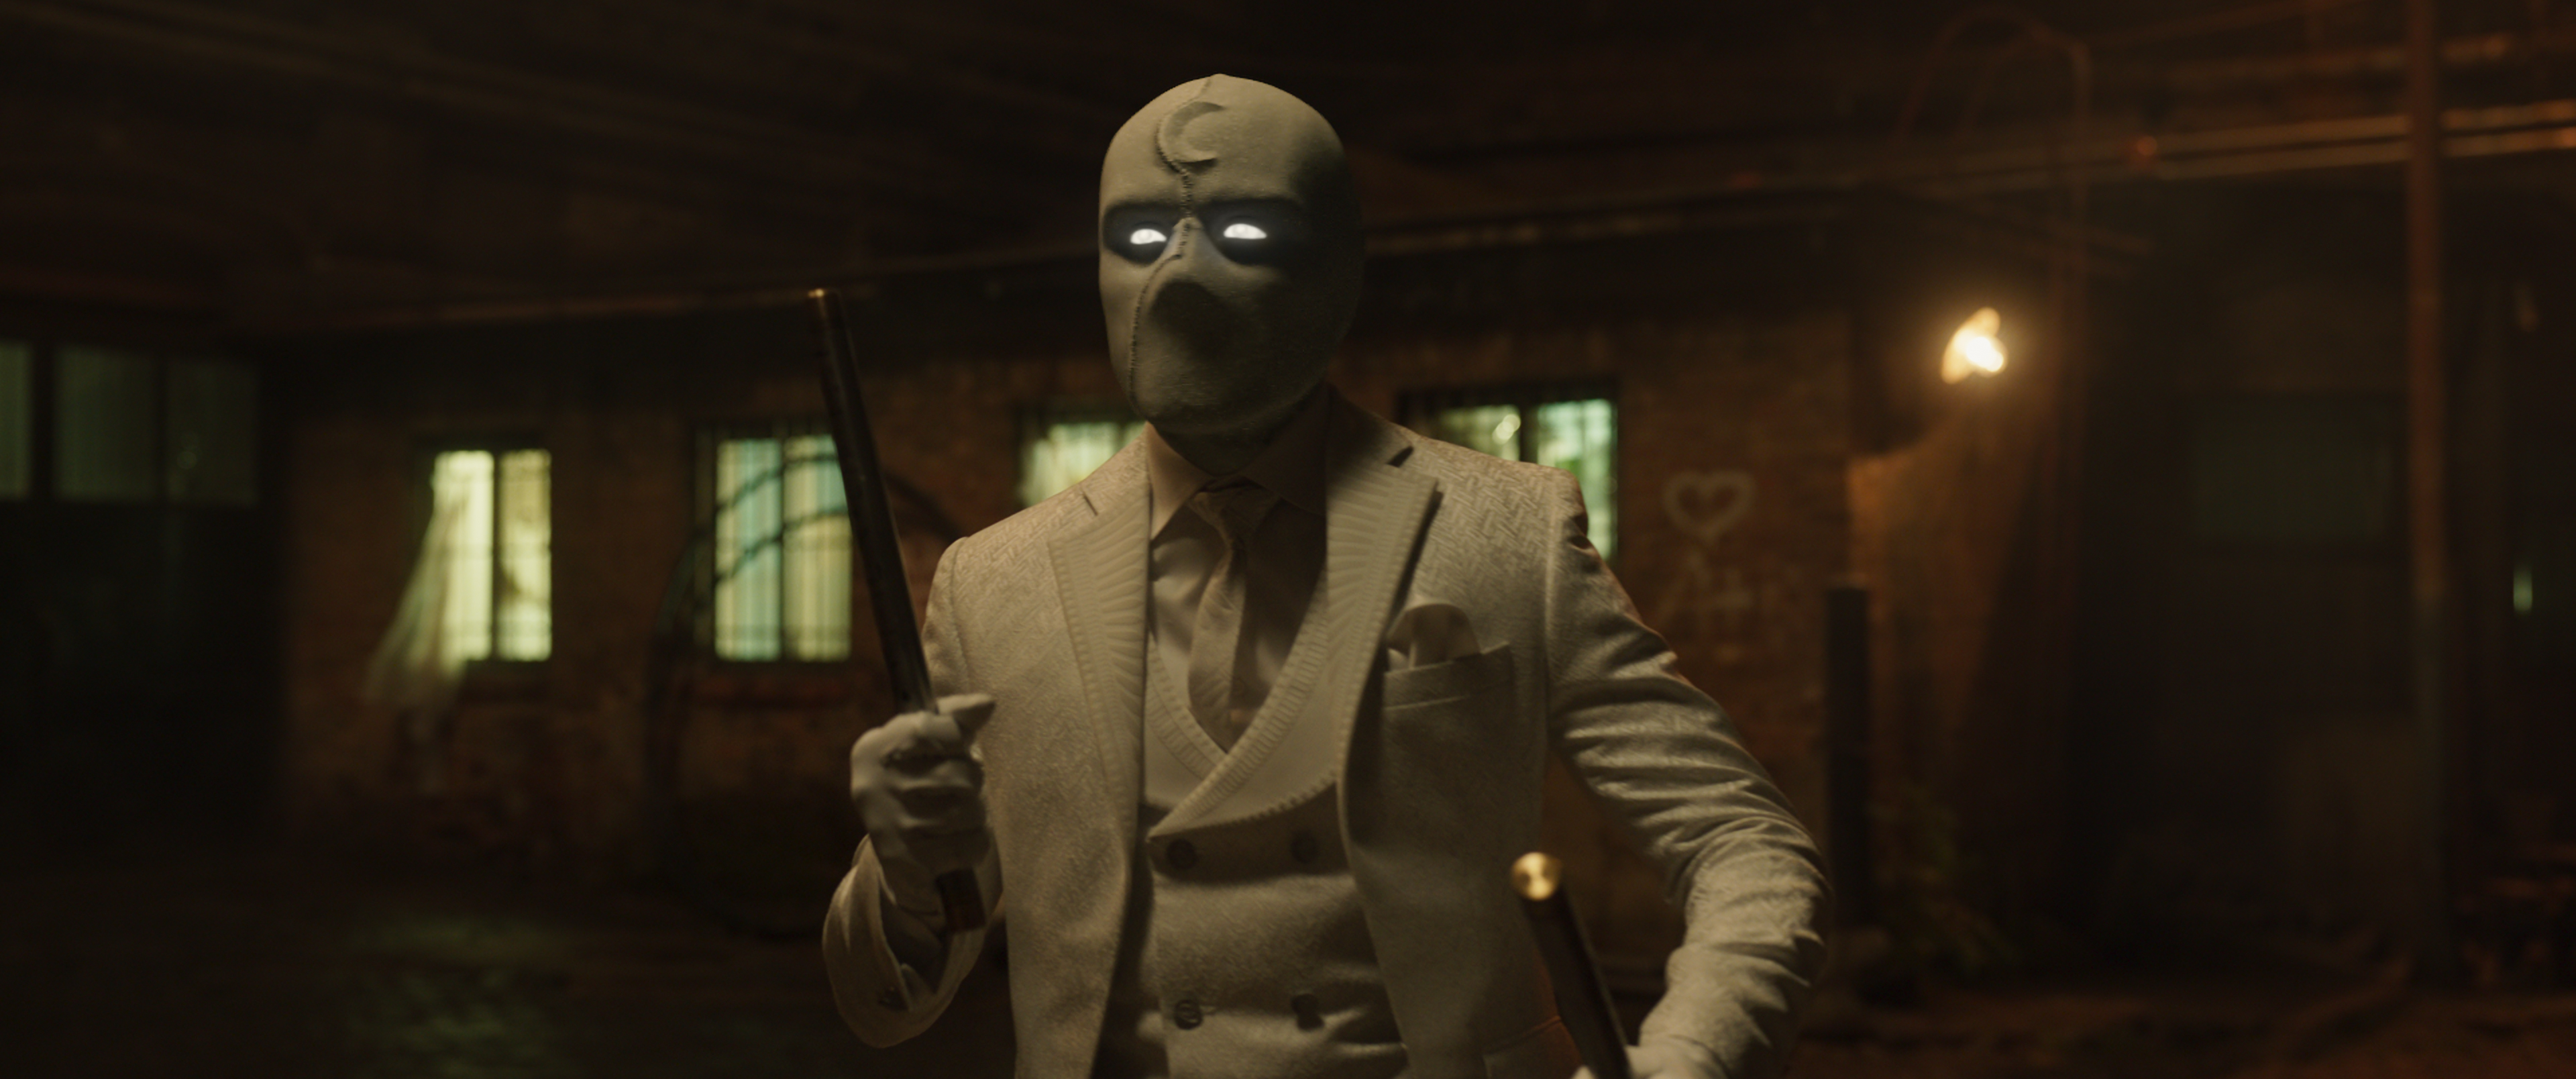 Oscar Isaac as Mr. Knight, one facet of Moon Knight’s personality.